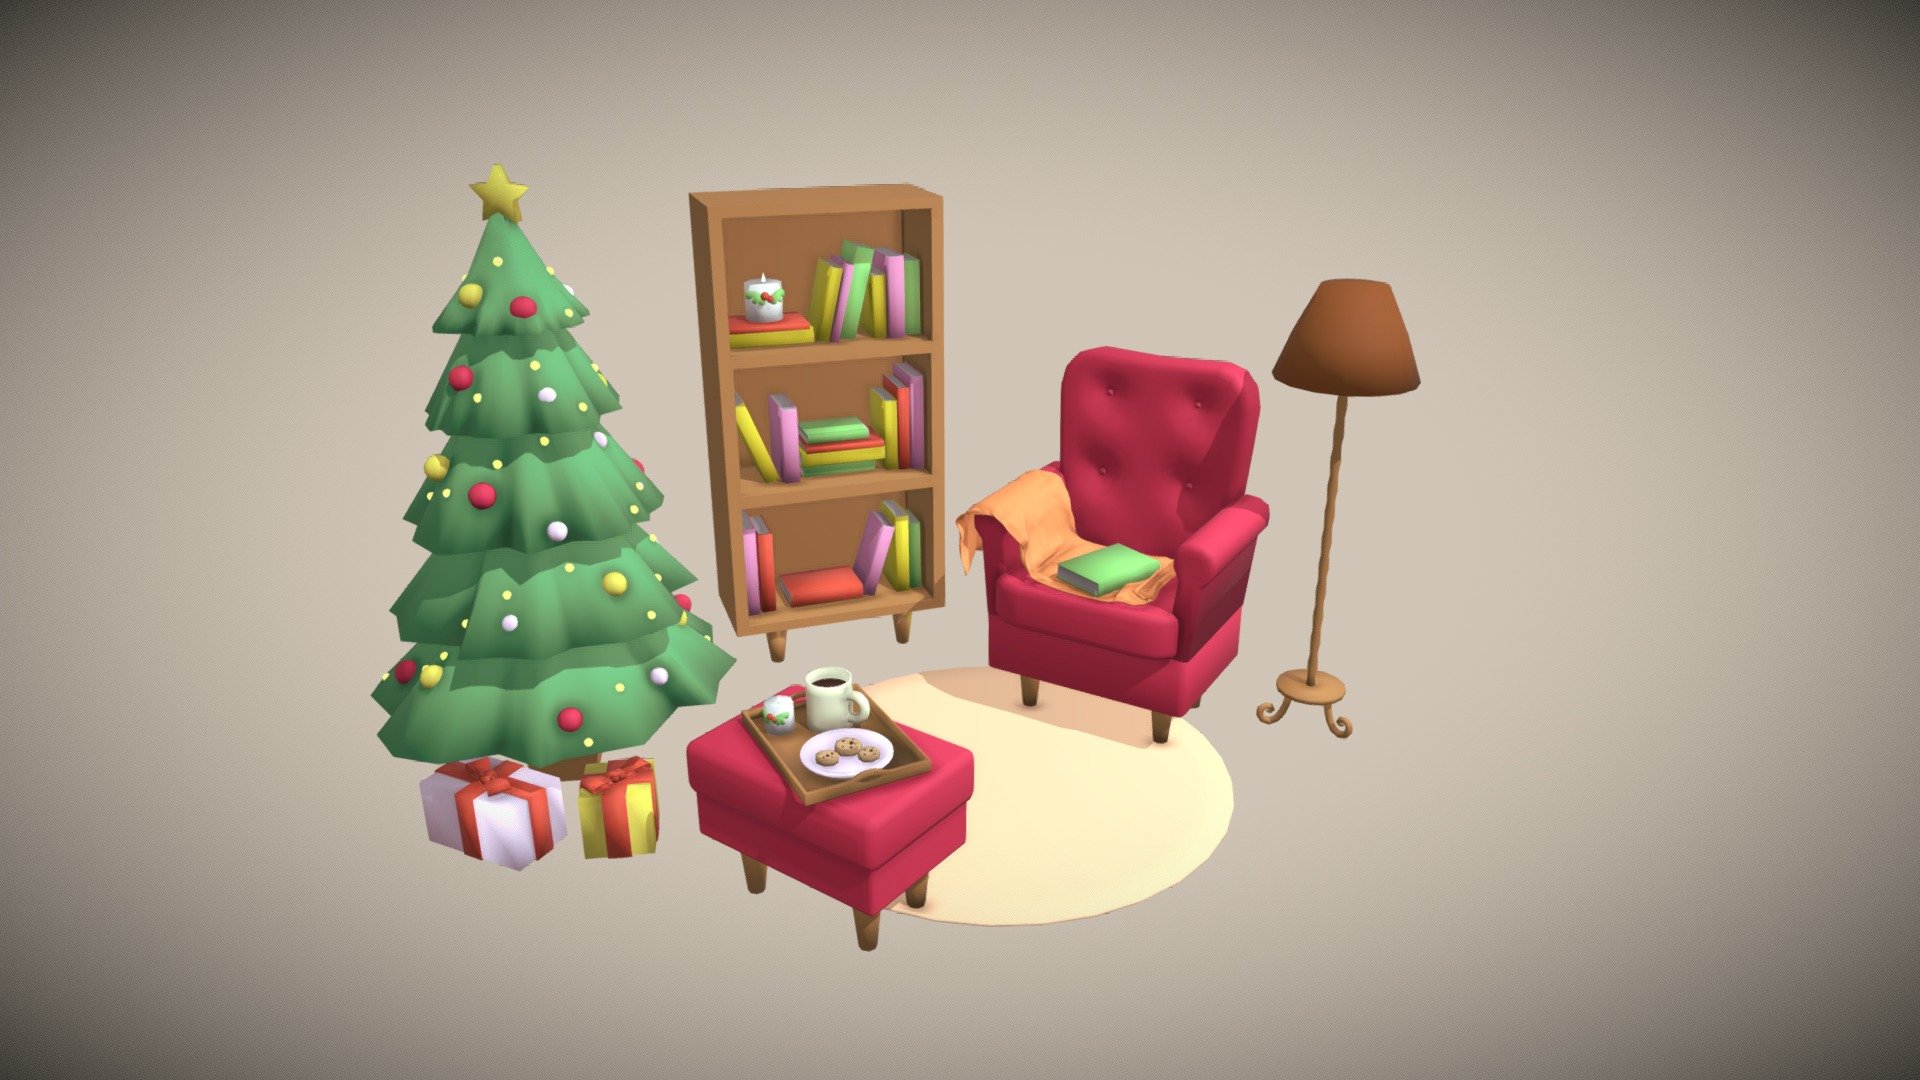 A little christmas scene i made as a training. 
I hope it gives you the cozy, relaxing vibes of a christmas holiday time! - Christmas scene - 3D model by KMD (@kmd.3d) 3d model